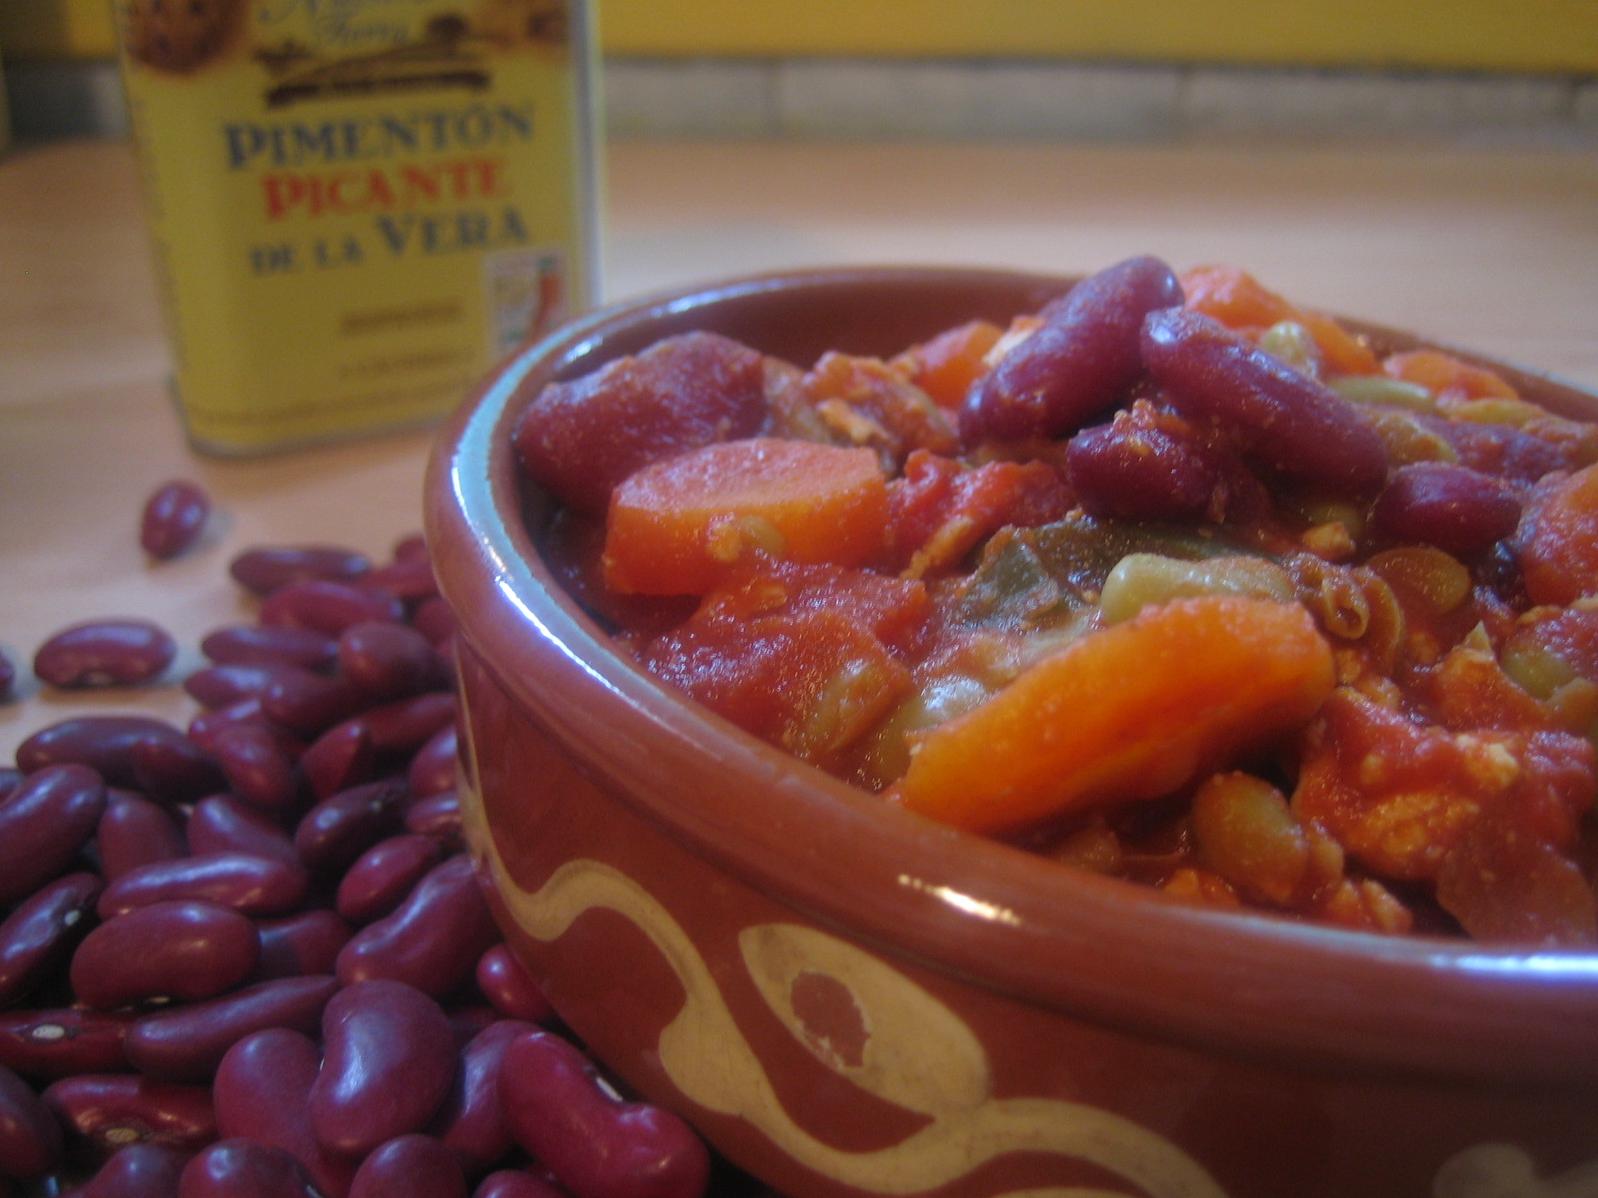  The combination of spices in this chili is a match made in heaven.